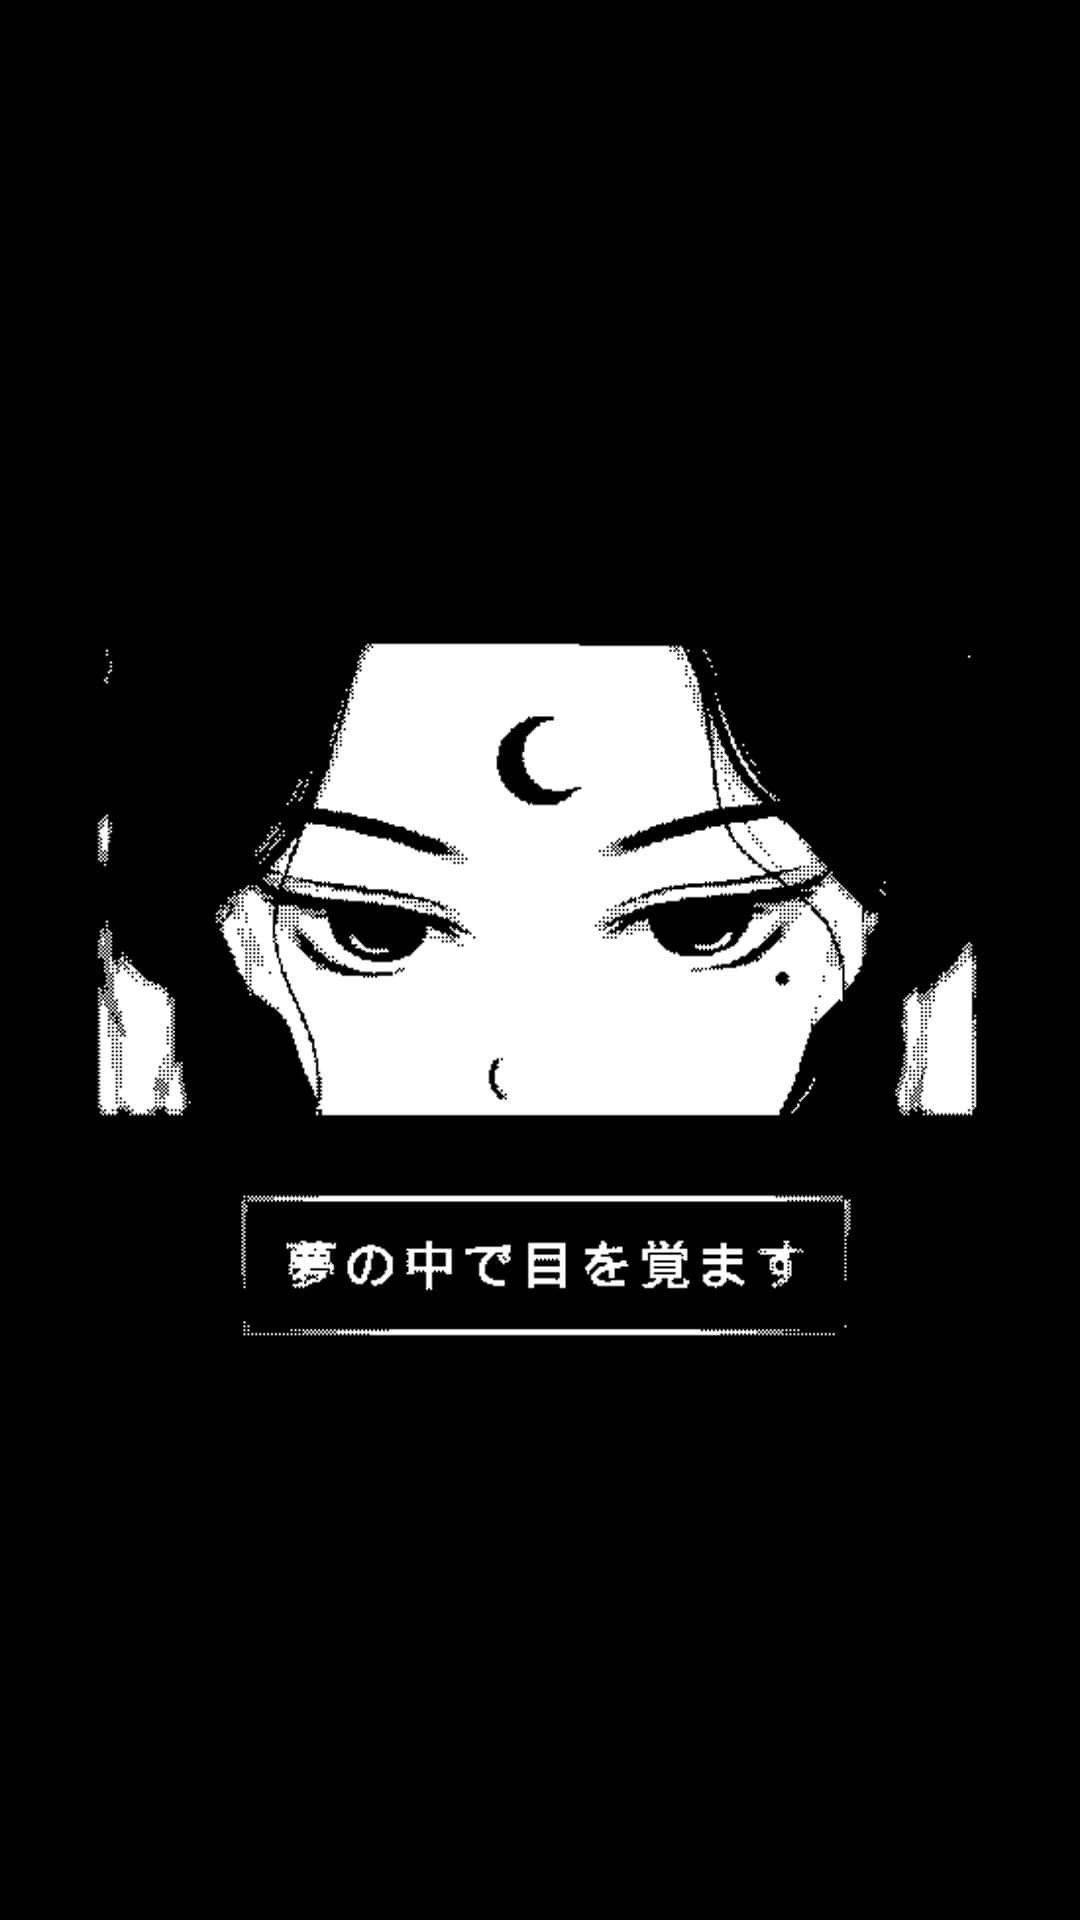 Download Black And White Anime Aesthetic Wallpaper